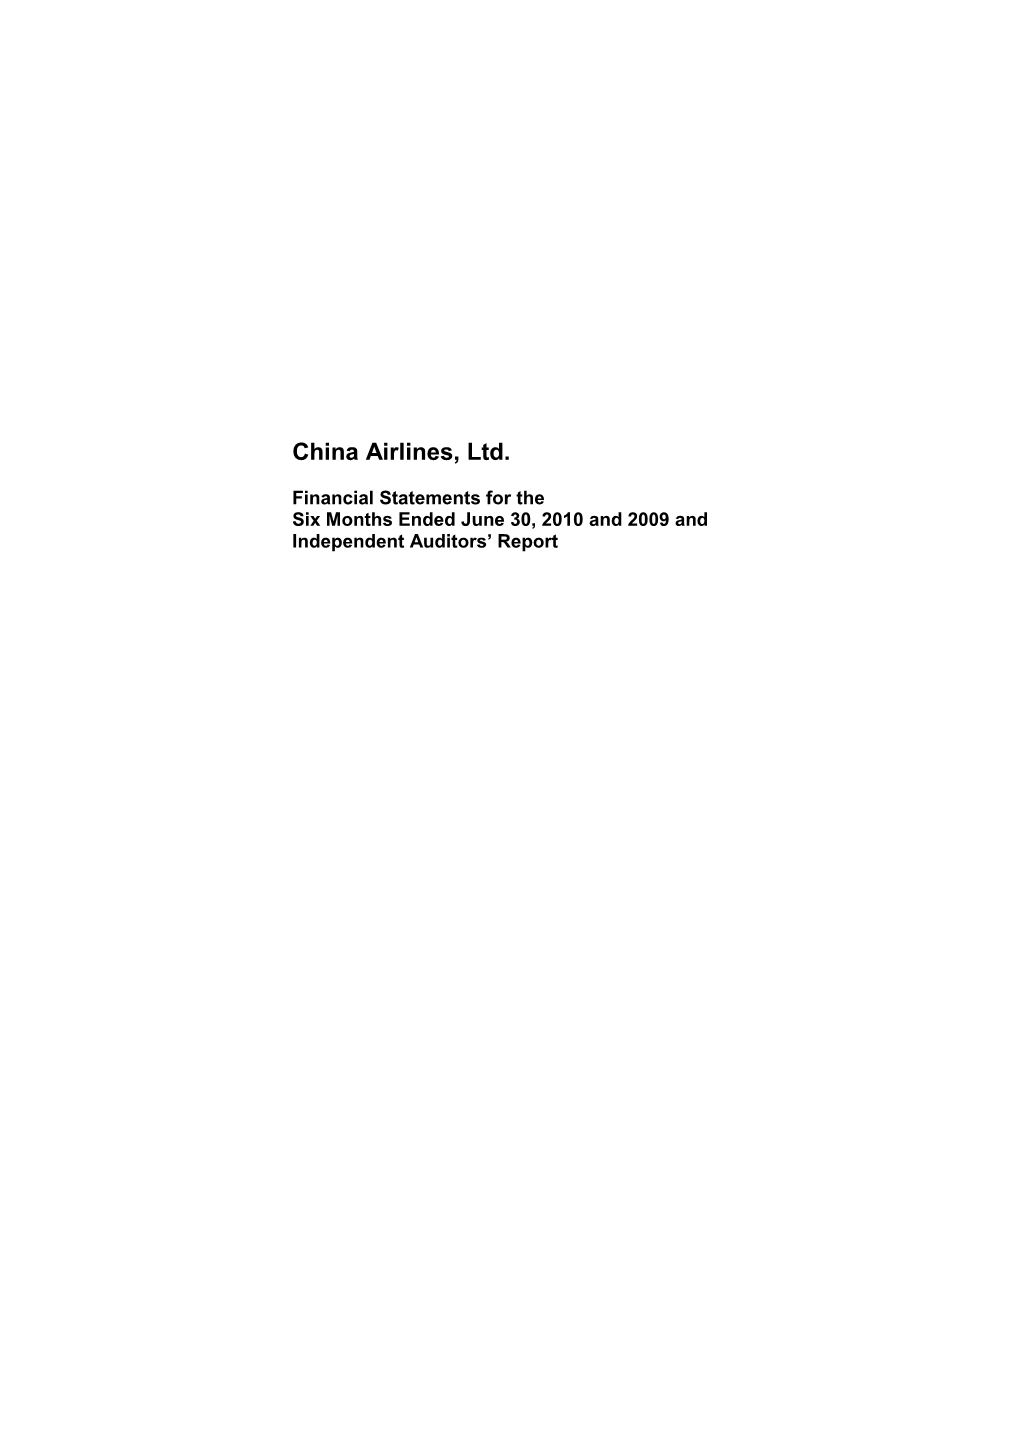 China Airlines, Ltd. Financial Statements for the Six Months